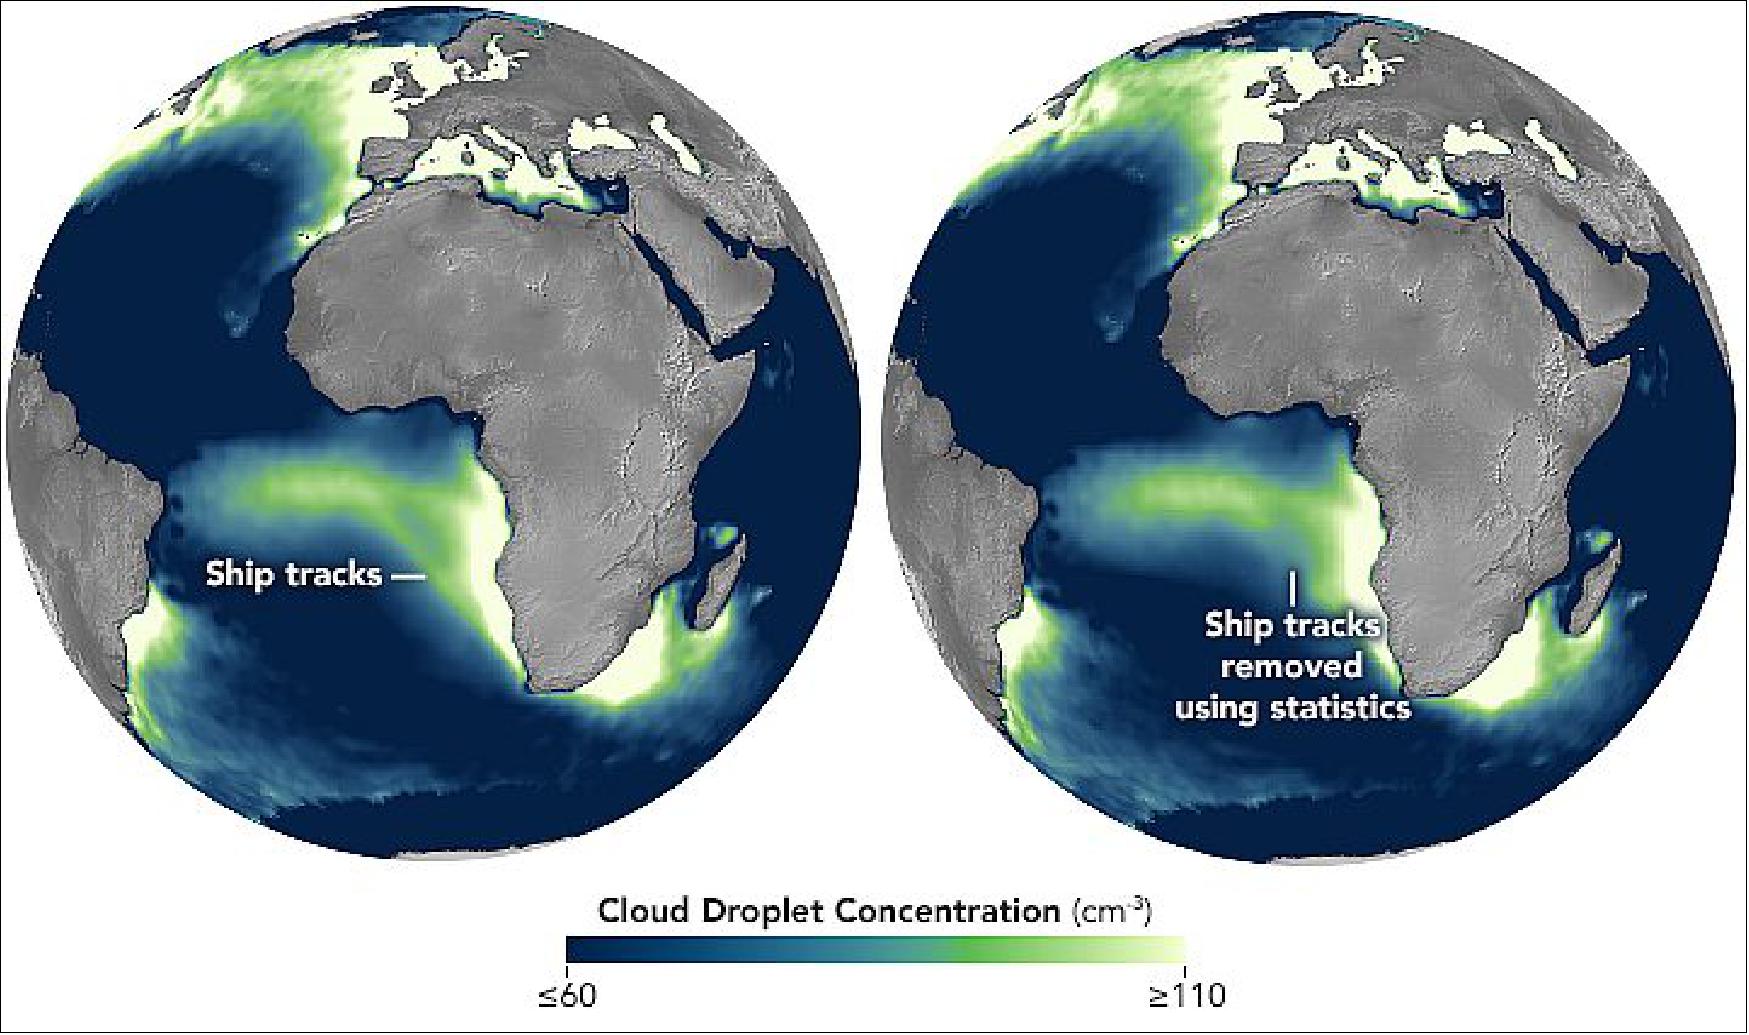 Figure 76: The maps show the average cloud droplet concentrations from 2003 to 2015 during the cloudiest months for the region (September, October, and November). The map on the left shows the cloud droplet concentrations observed by MODIS on NASA's Aqua and Terra satellites. The map on the right shows the expected cloud droplet concentrations without shipping activity. The expected values were calculated based on statistical patterns from nearby, unpolluted areas. The team then calculated the difference in the amount of sunlight reflected back into space between the two scenarios. The team used data from NASA's Clouds and the Earth's Radiant Energy System (CERES) instruments, which monitor the solar energy reflected by Earth and the heat energy emitted by the planet (NASA Earth Observatory, image by Lauren Dauphin, using data from Michael Diamond, et al. (2020). Story by Kasha Patel)